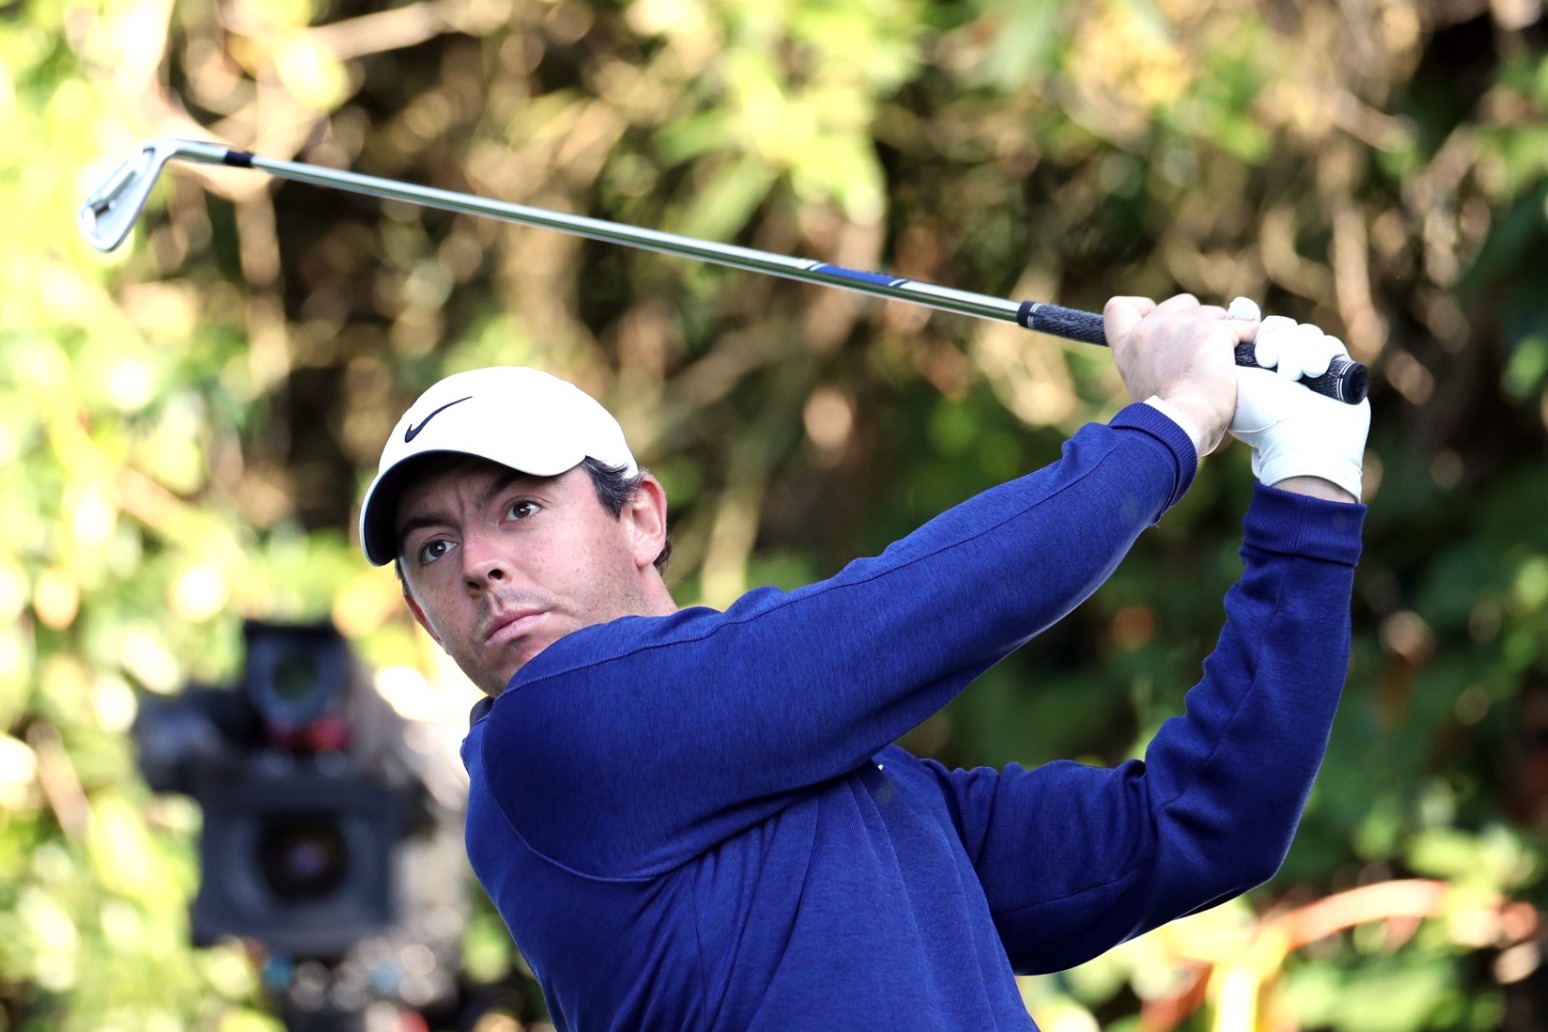 Rory McIlroy makes overdue strong start to lead the US PGA Championship in Tulsa 